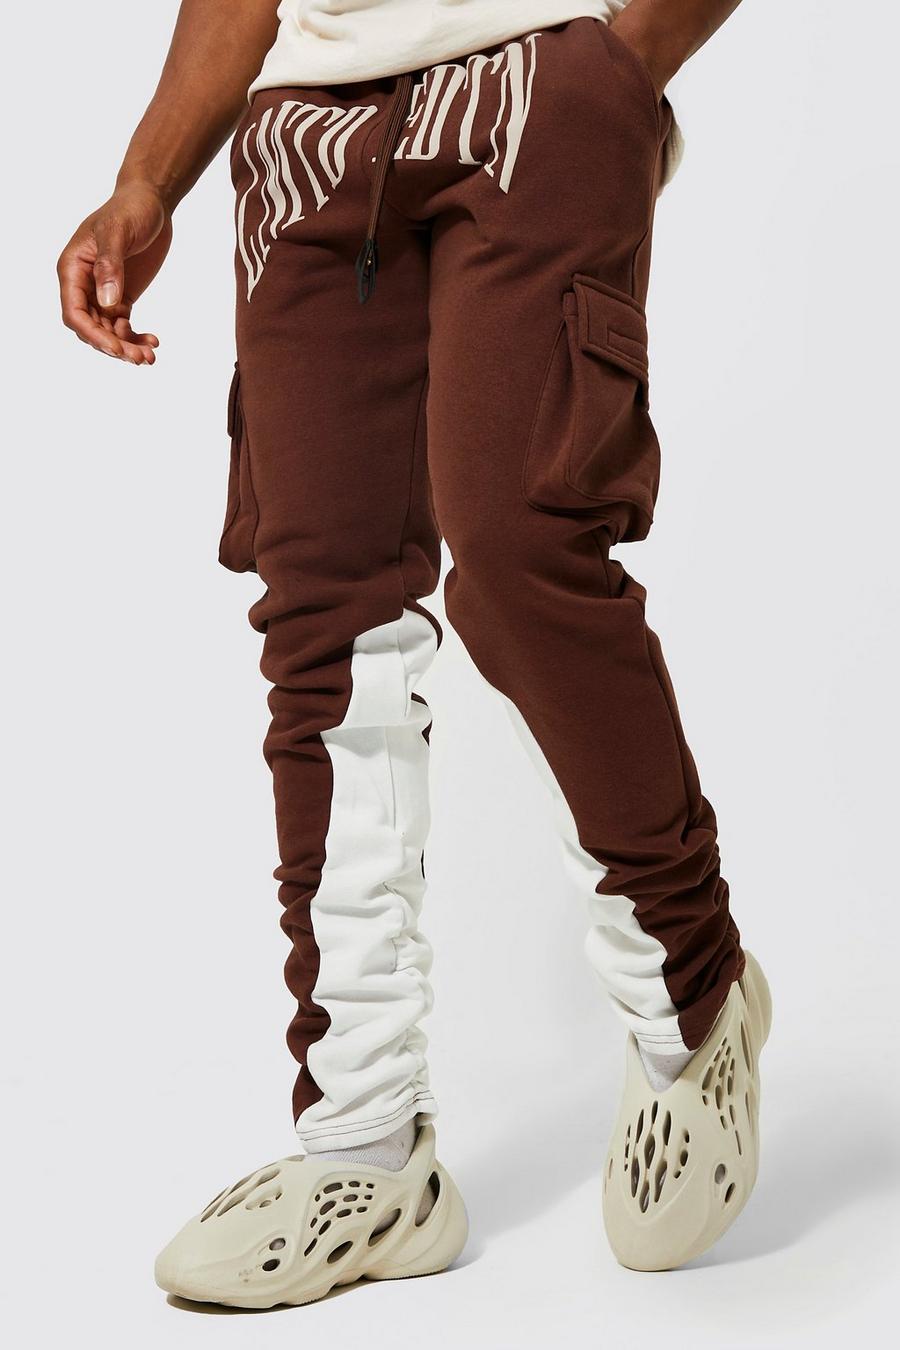 https://media.boohoo.com/i/boohoo/amm13014_chocolate_xl/male-chocolate-limited-edition-stacked-cargo-joggers/?w=900&qlt=default&fmt.jp2.qlt=70&fmt=auto&sm=fit